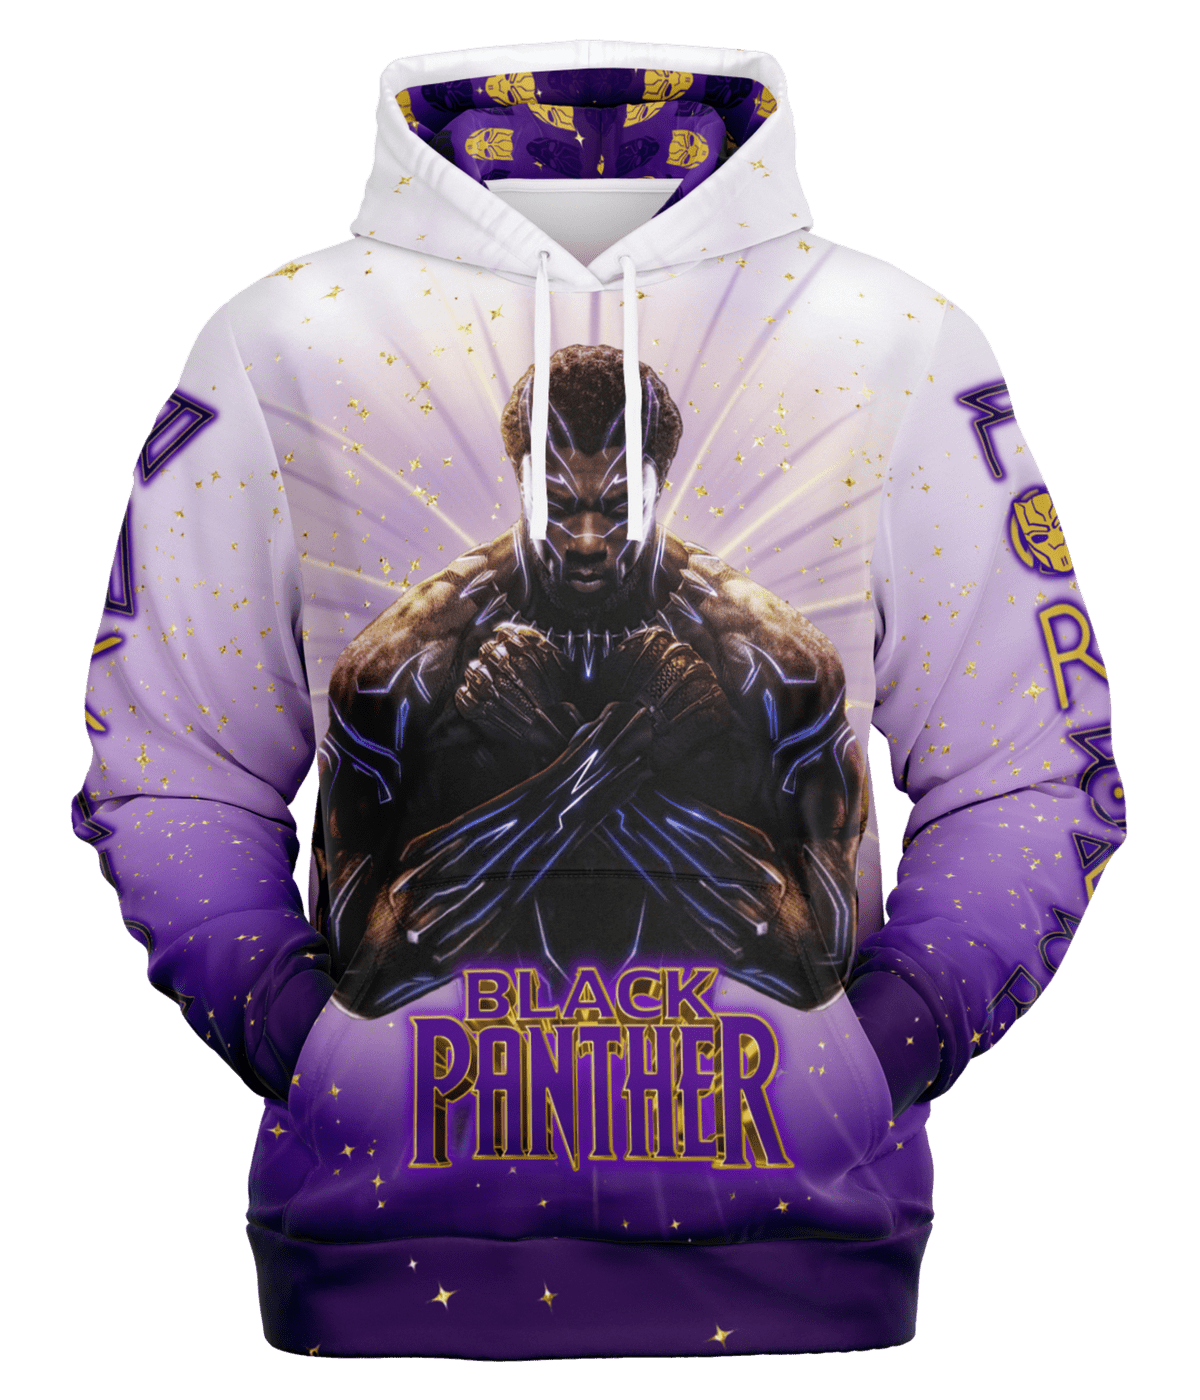 Wakanda Forever / Black Panther front facing hoodie